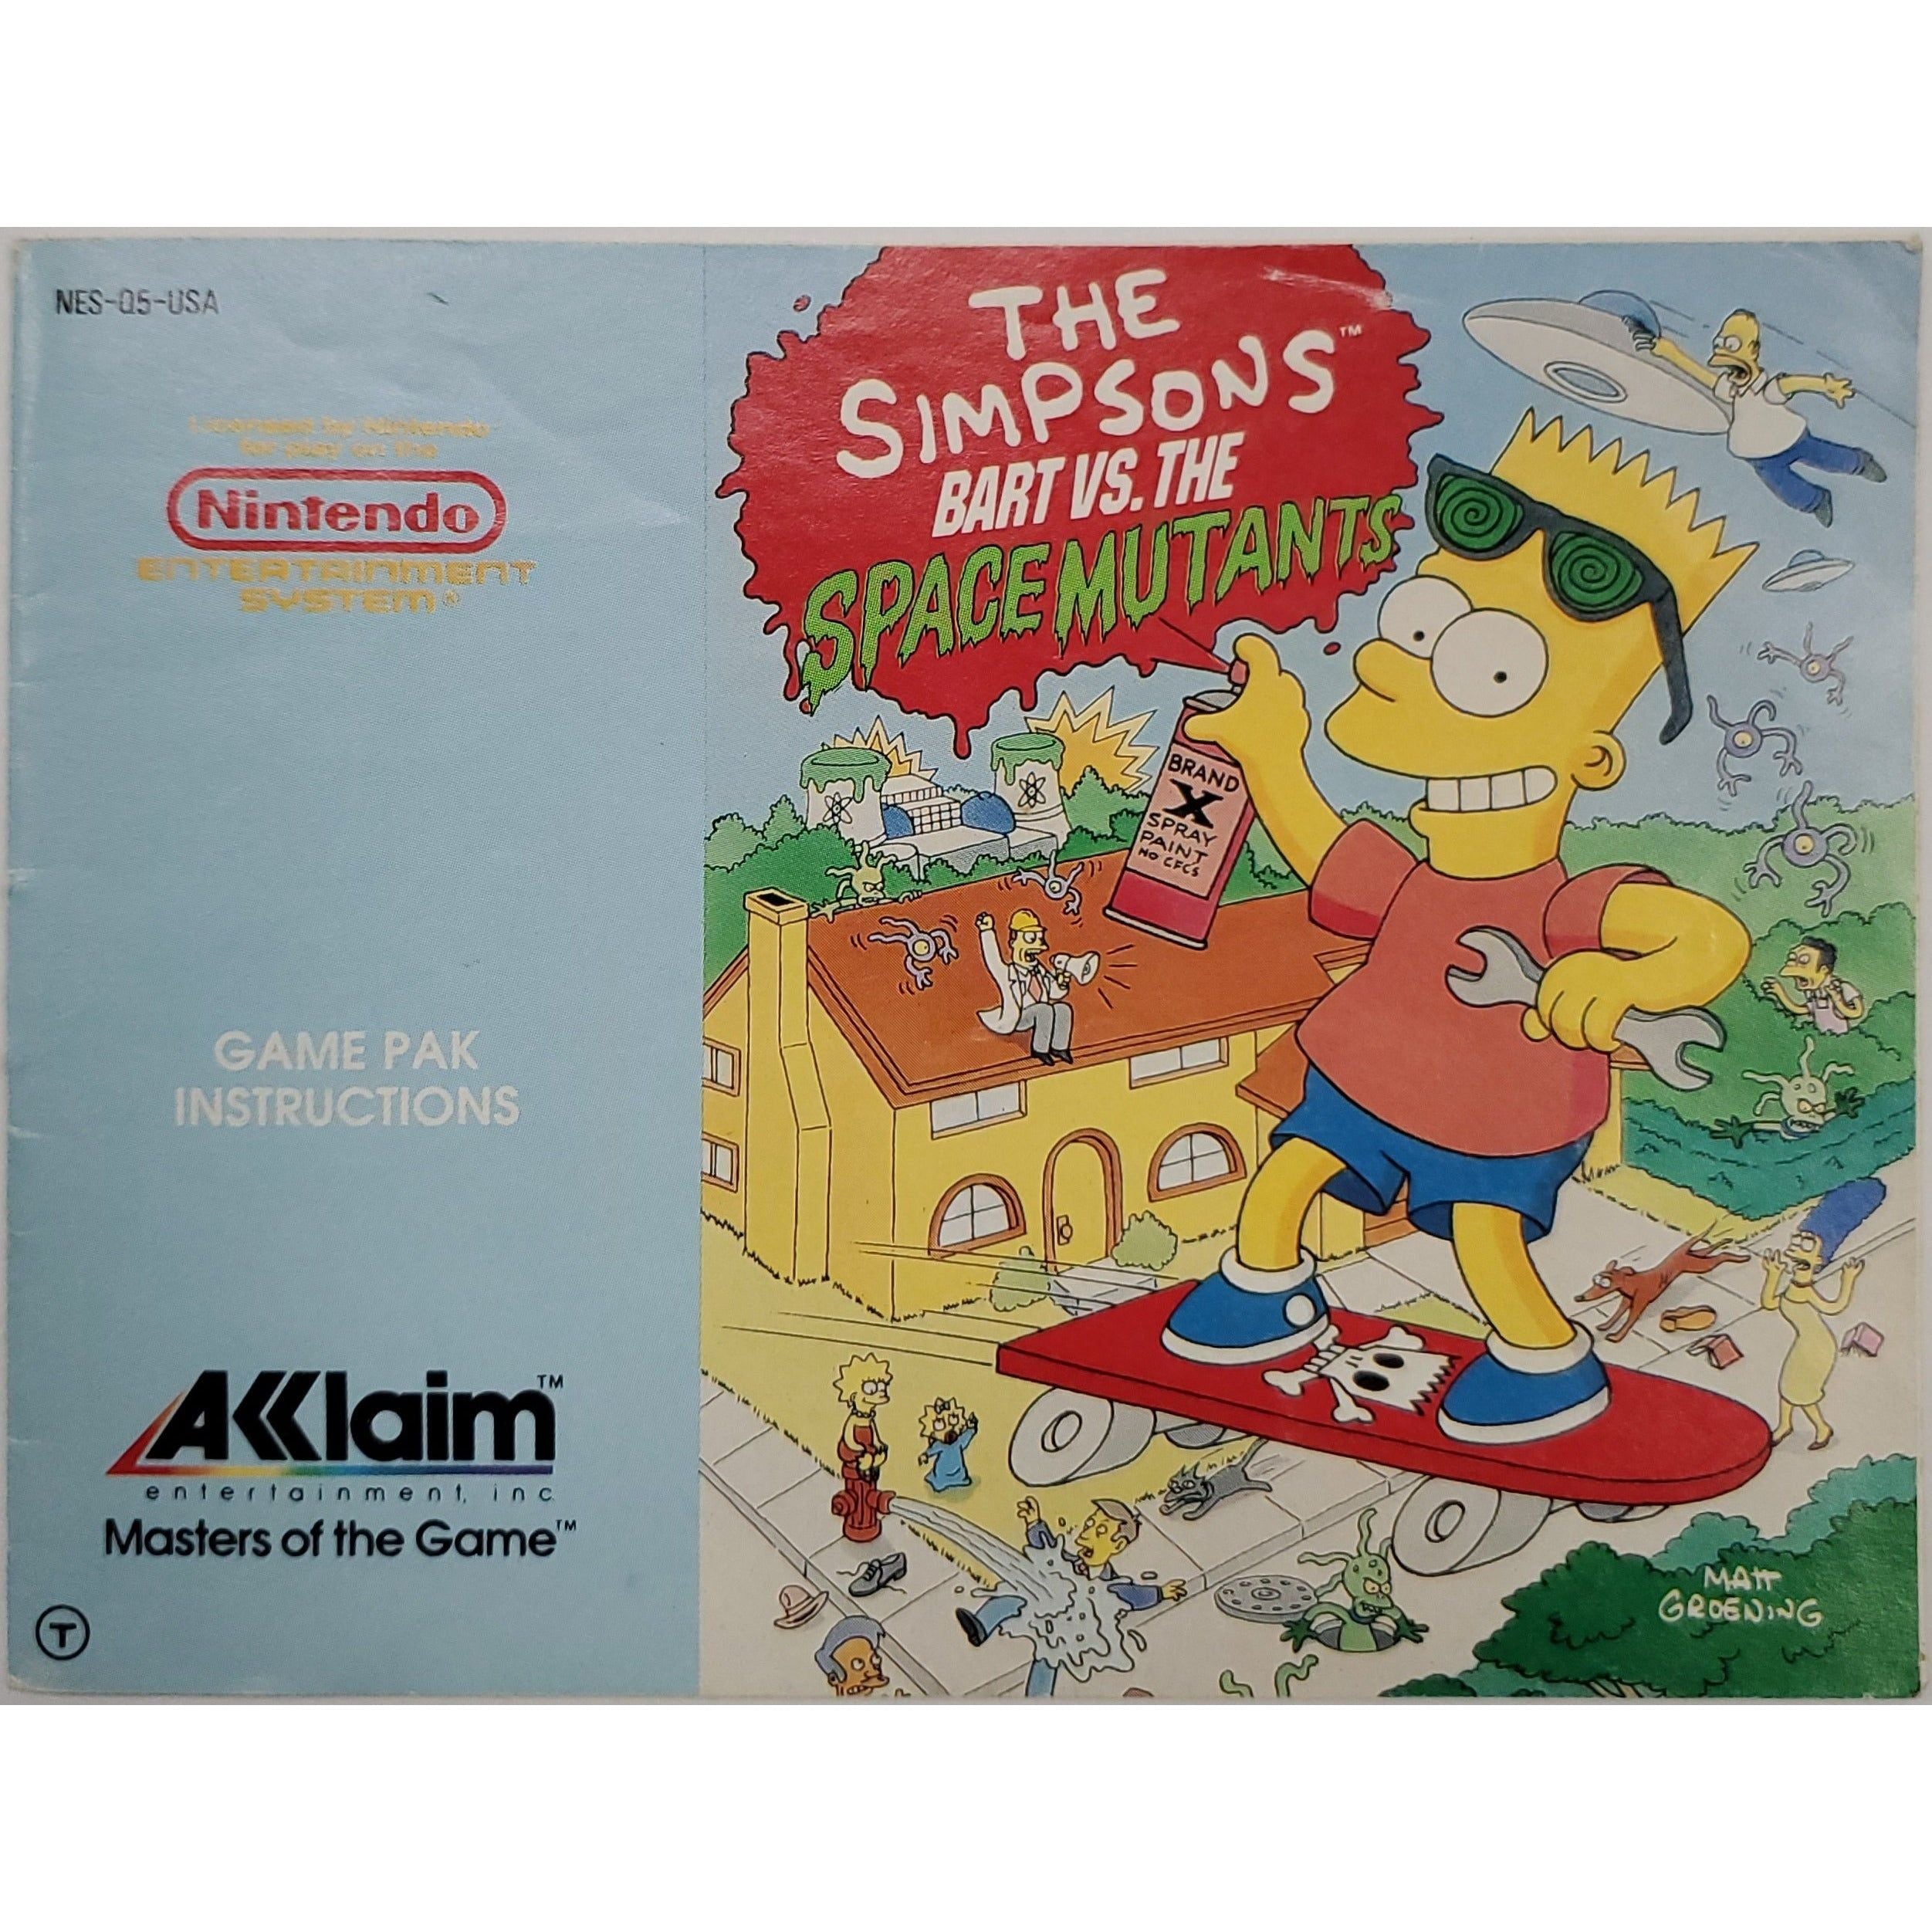 NES - The Simpsons Bart vs the Space Mutants (Manual)